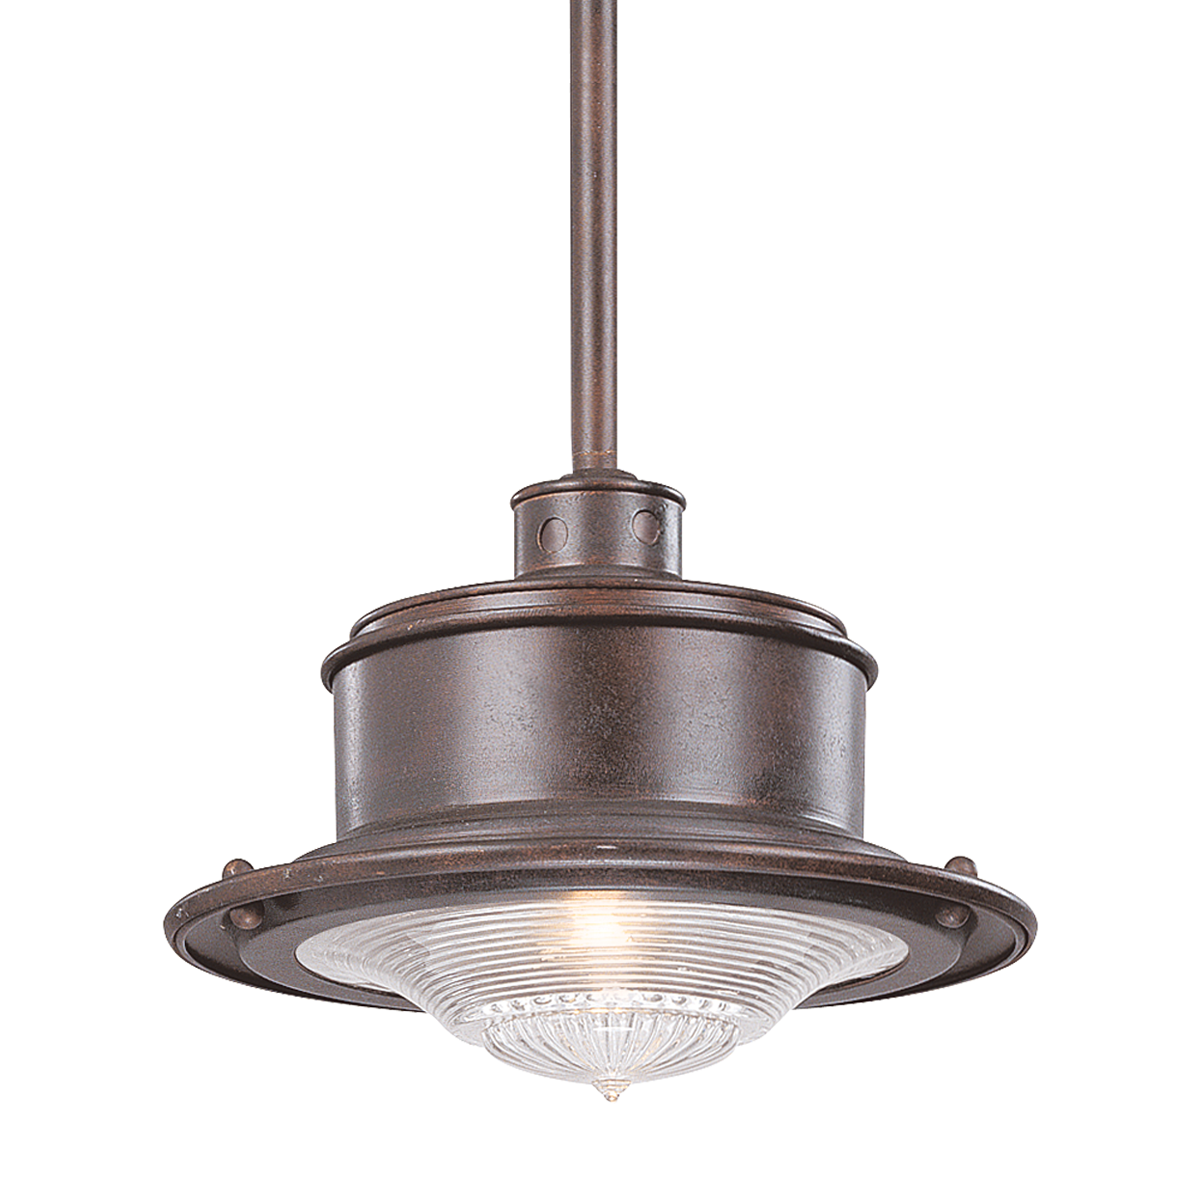 Troy Lighting SOUTH STREET 1LT HANGING DOWNLIGHT LARGE OLD RUST F9397 Outdoor Light Fixture l Hanging Troy Lighting OLD RUST  